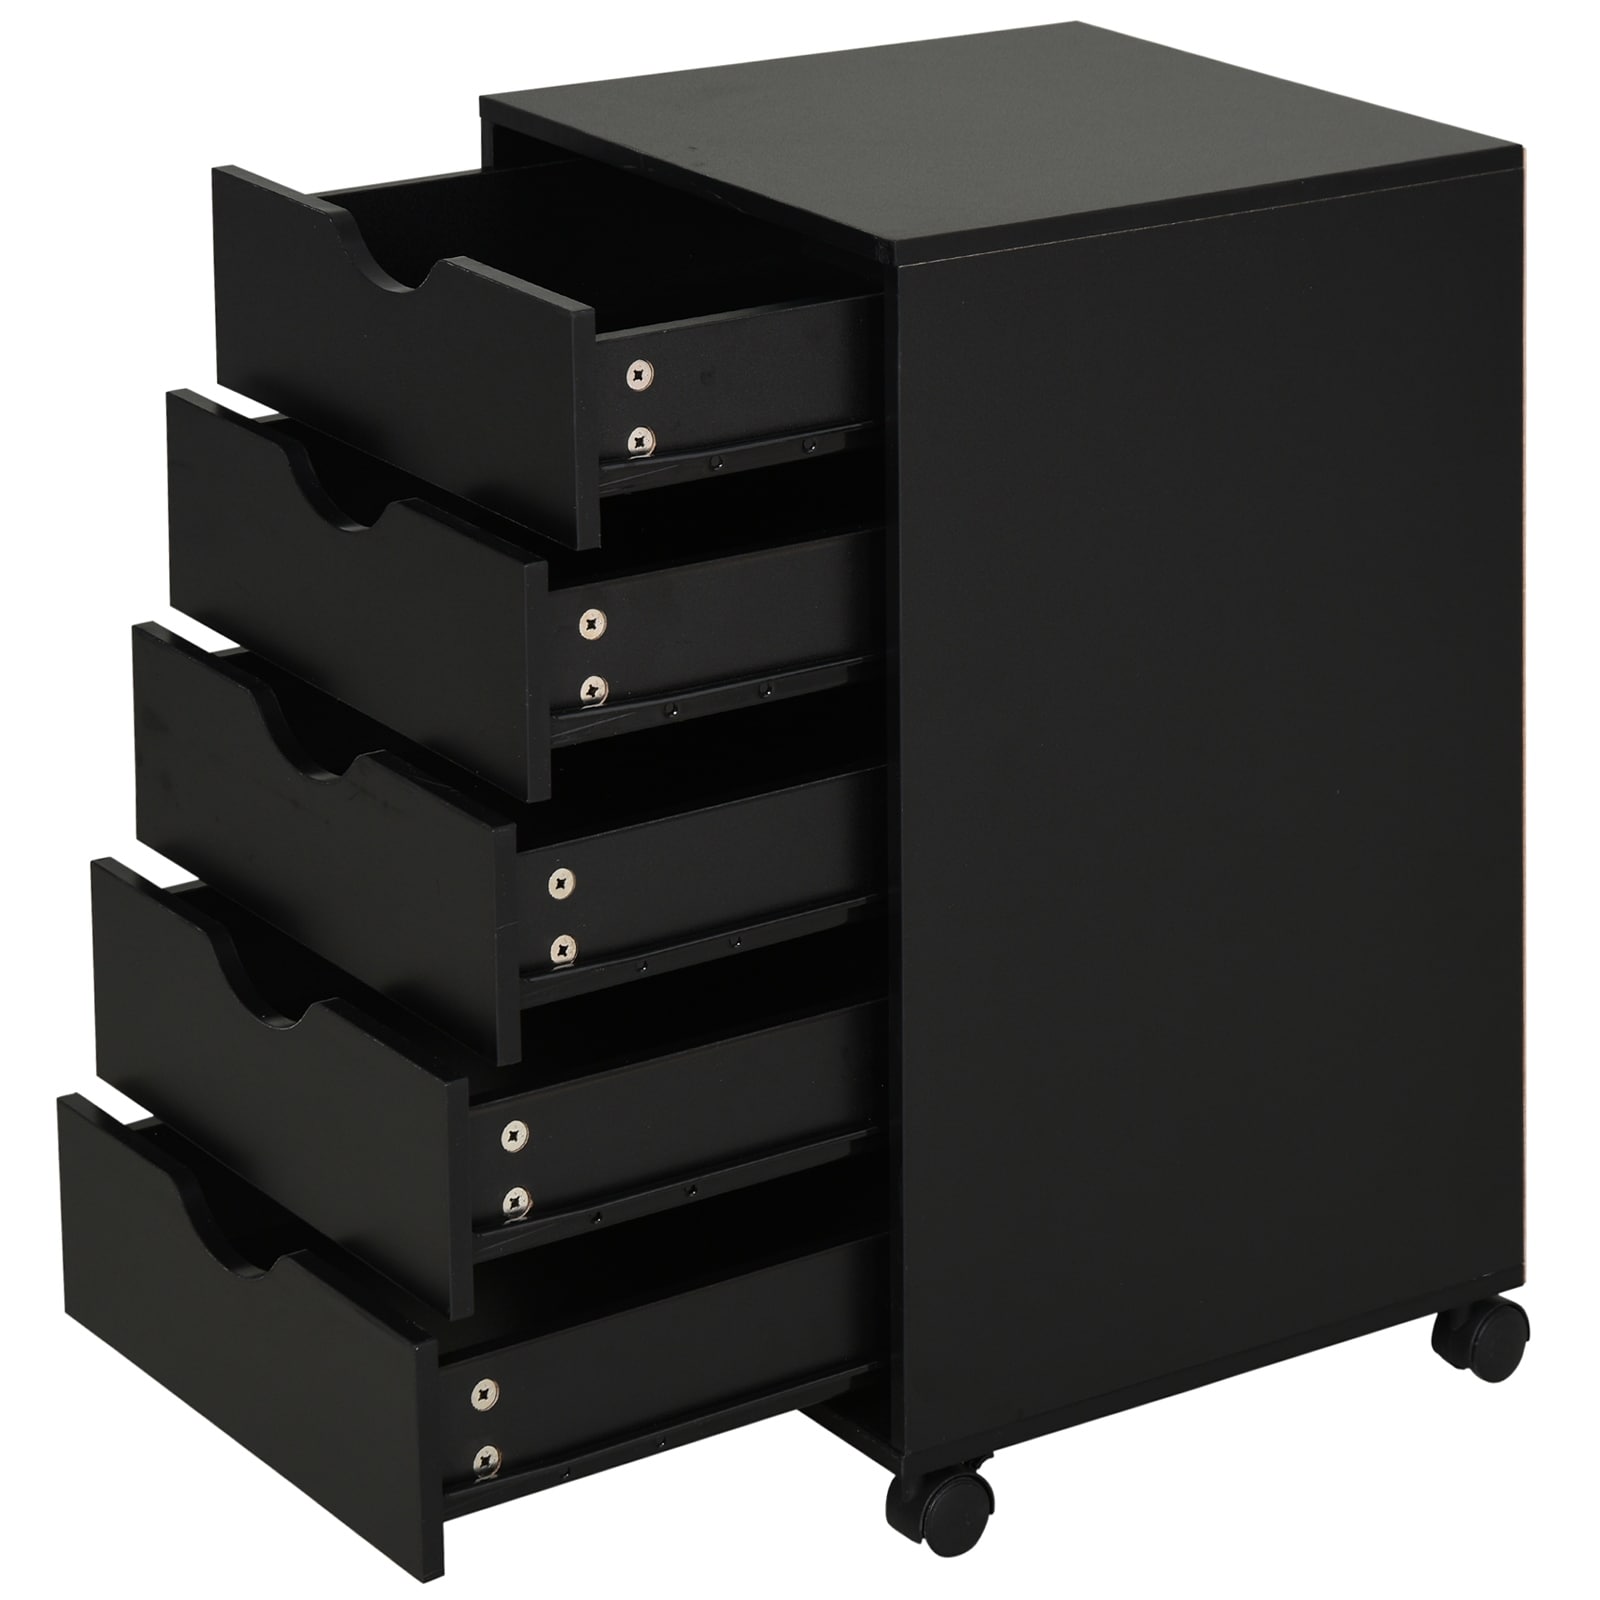 https://ak1.ostkcdn.com/images/products/is/images/direct/bae6a8f6eb1b68cb347ddc0d953b6ba4416938a3/HomCom-5-Drawer-Storage-Organizer-Filing-Cabinet-with-Nordic-Minimalist-Modern-Style-%26-Caster-Wheels-for-Mobility.jpg